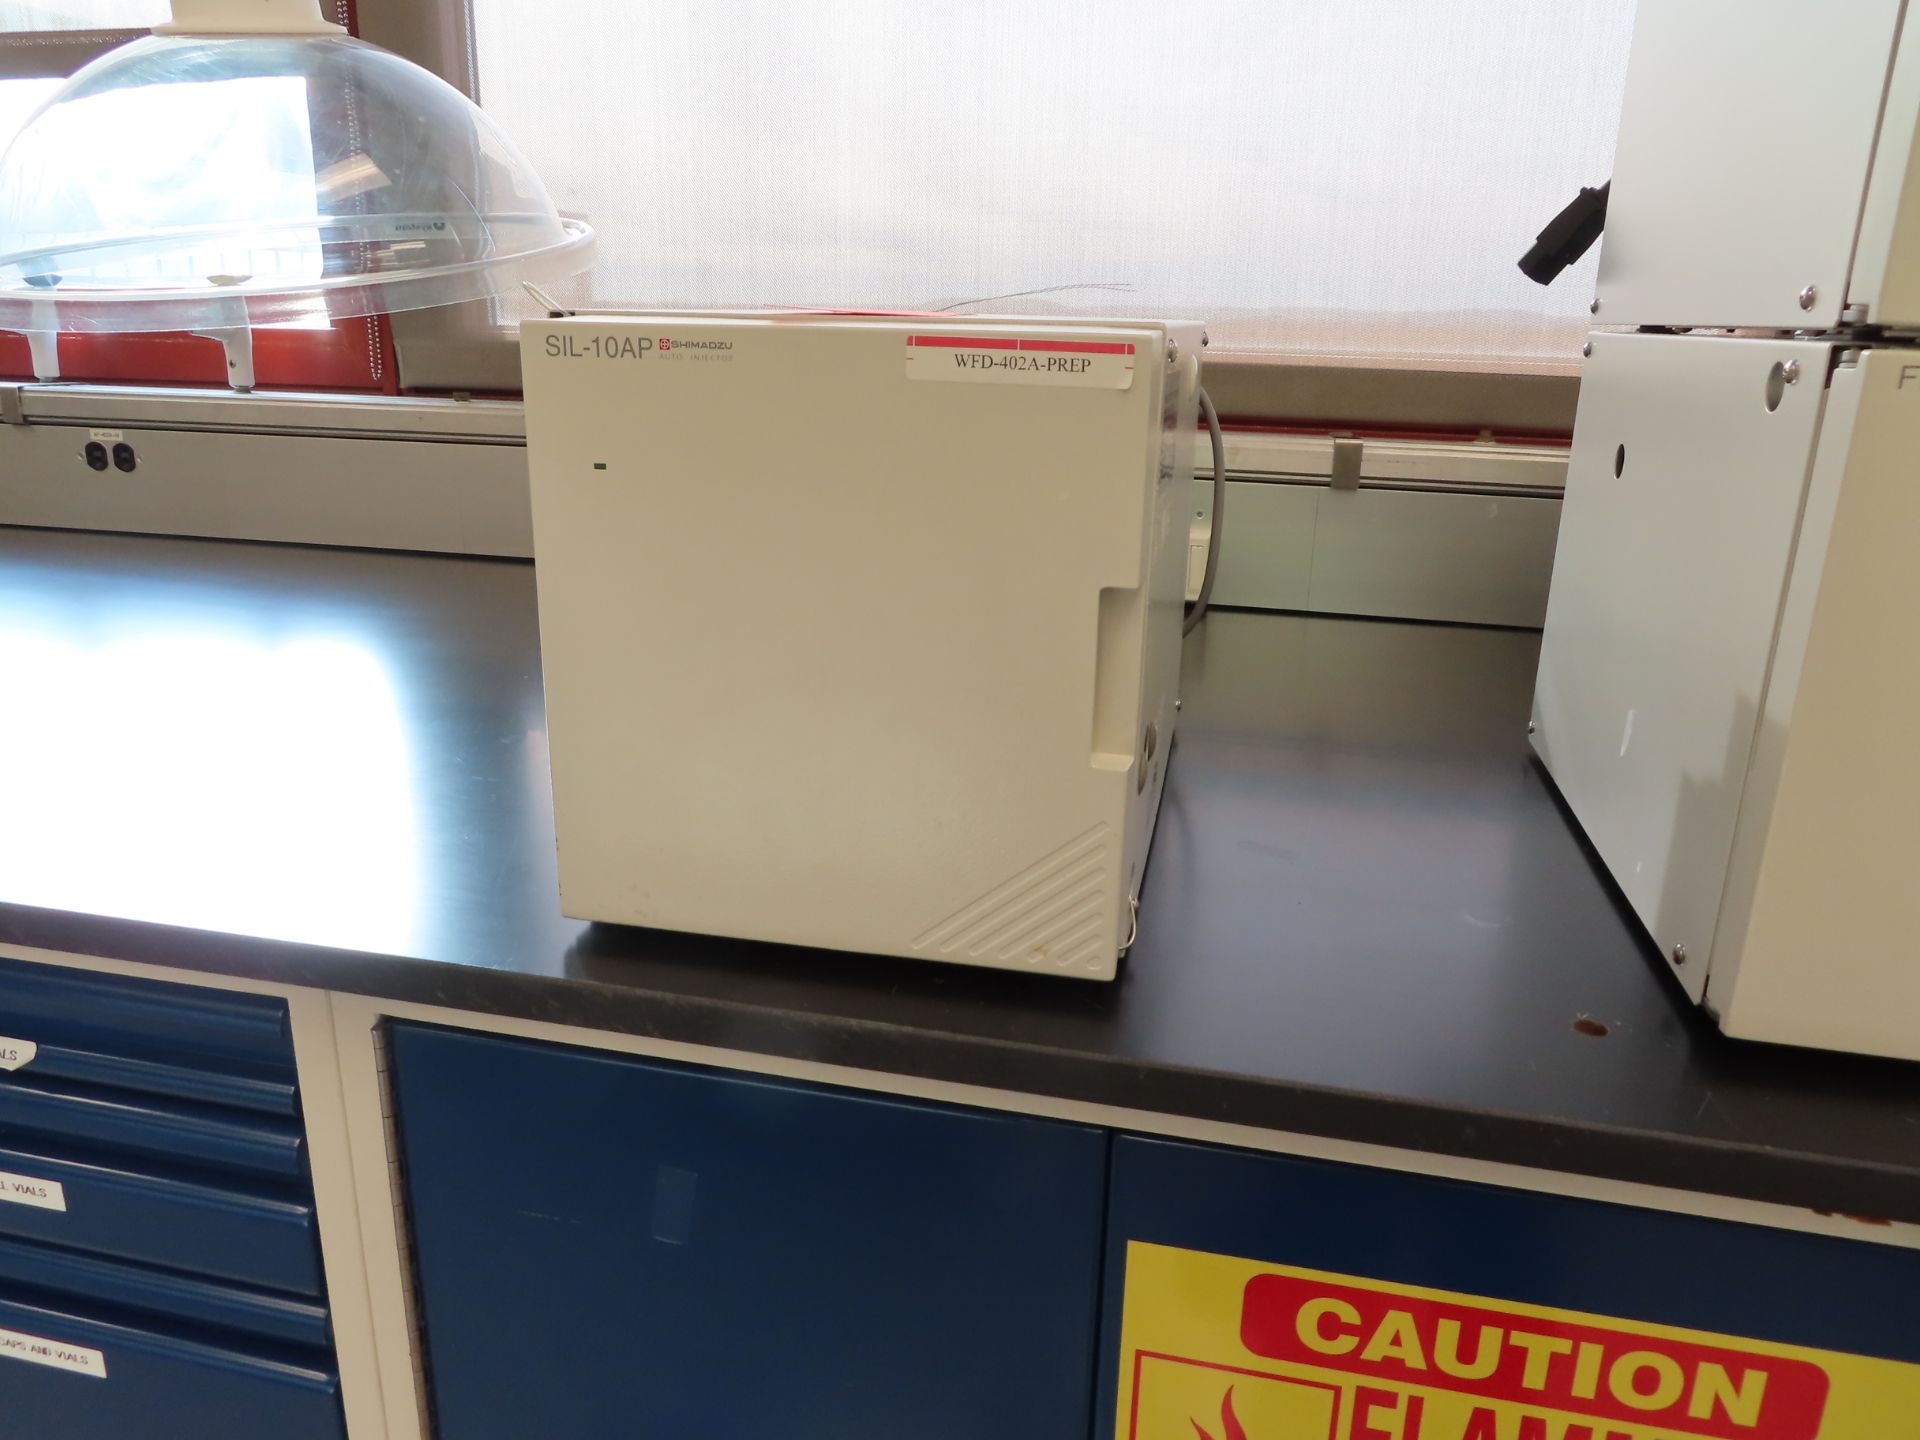 Shimadzu SIL-10A Auto Sampler, located in A Wing, 4th floor room 402A